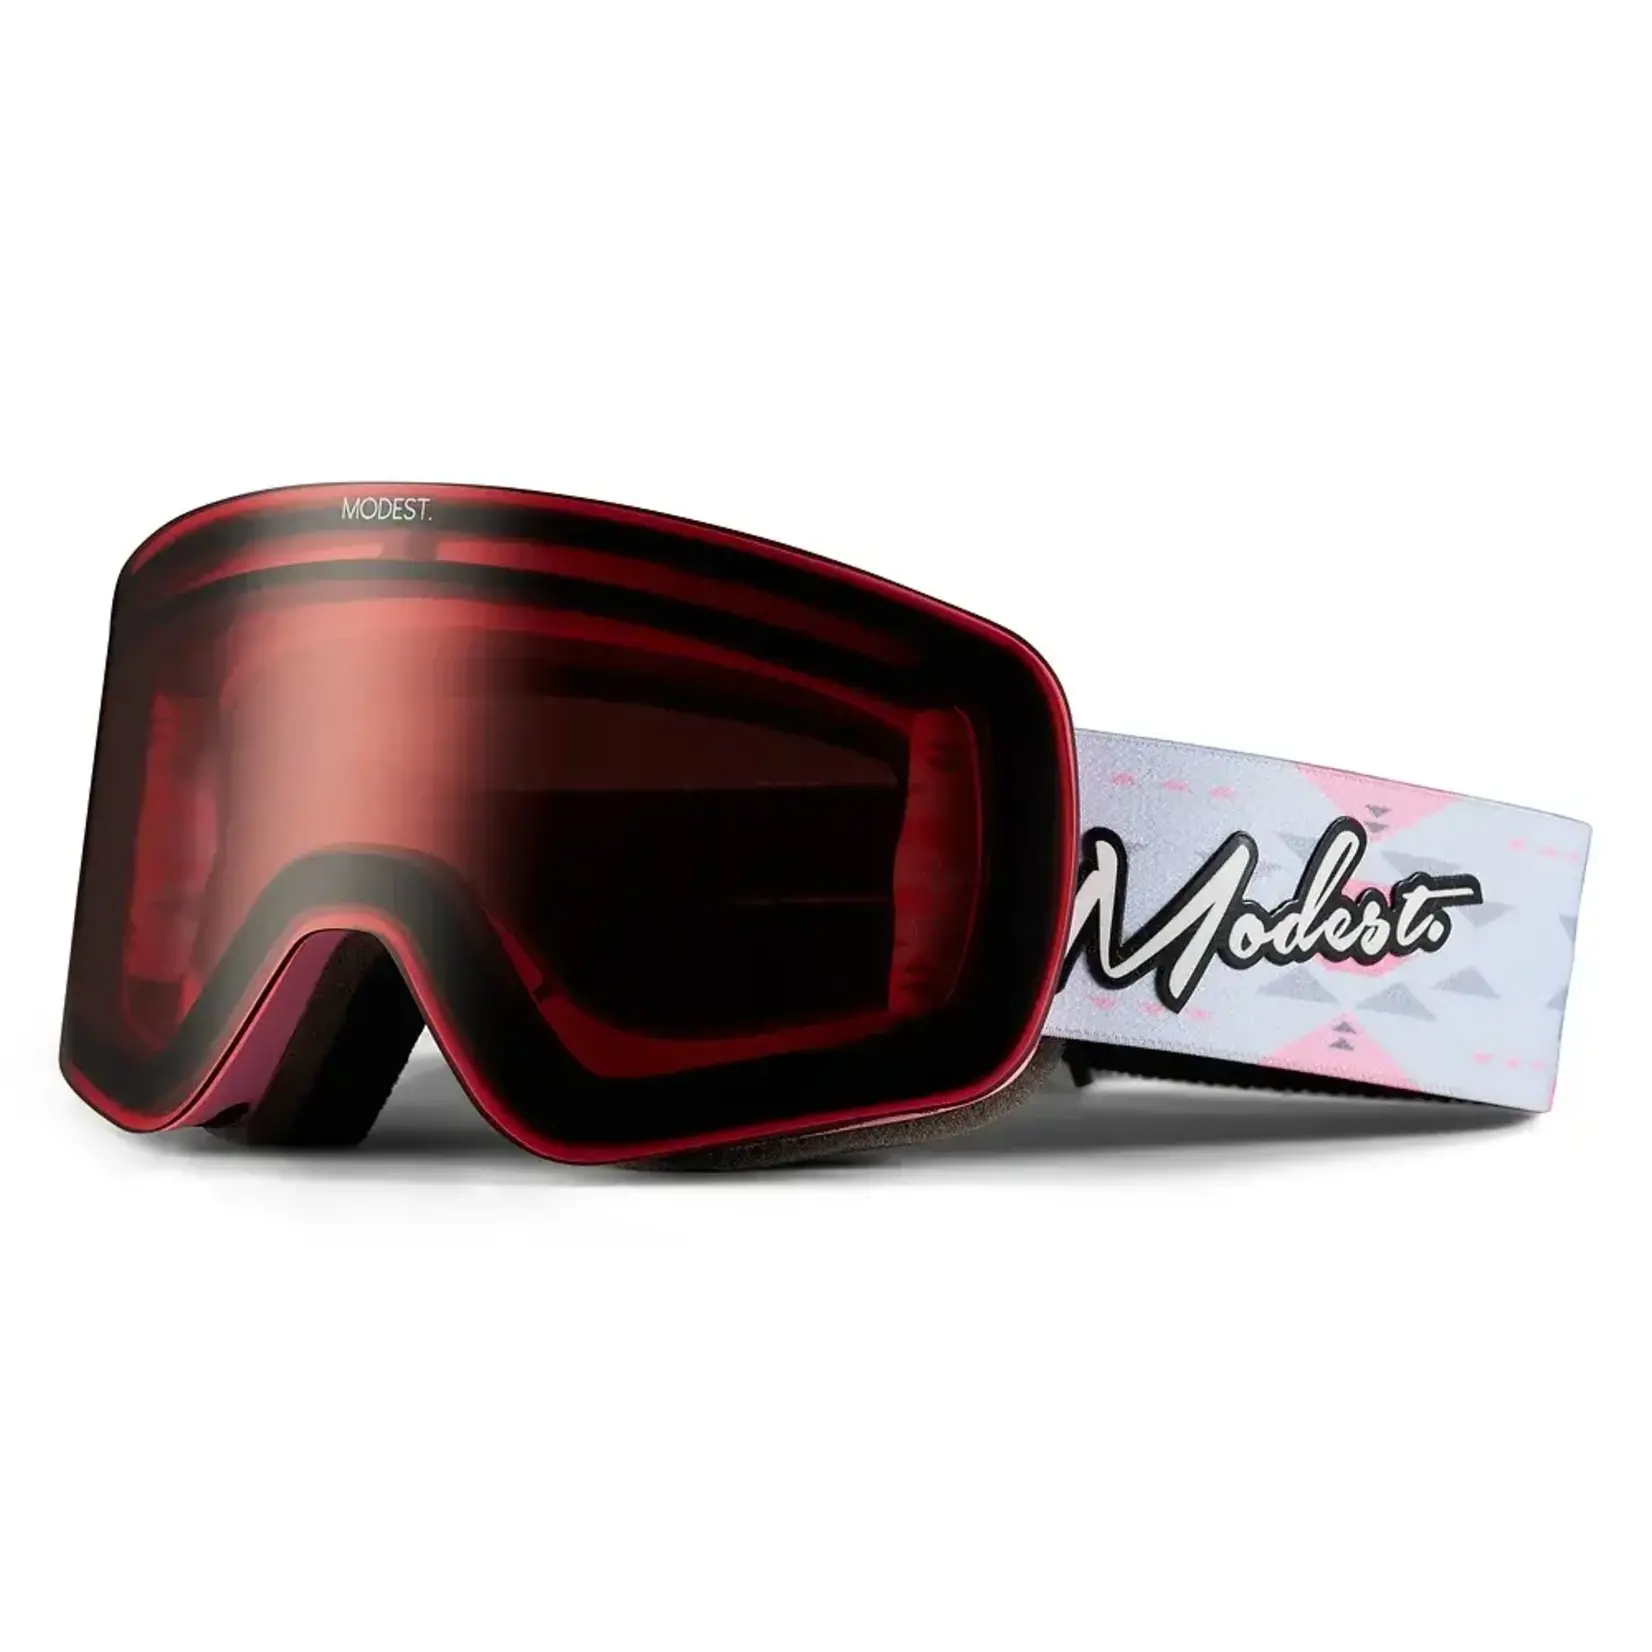 Modest Modest Cub Youth Goggle- Aztec Pink